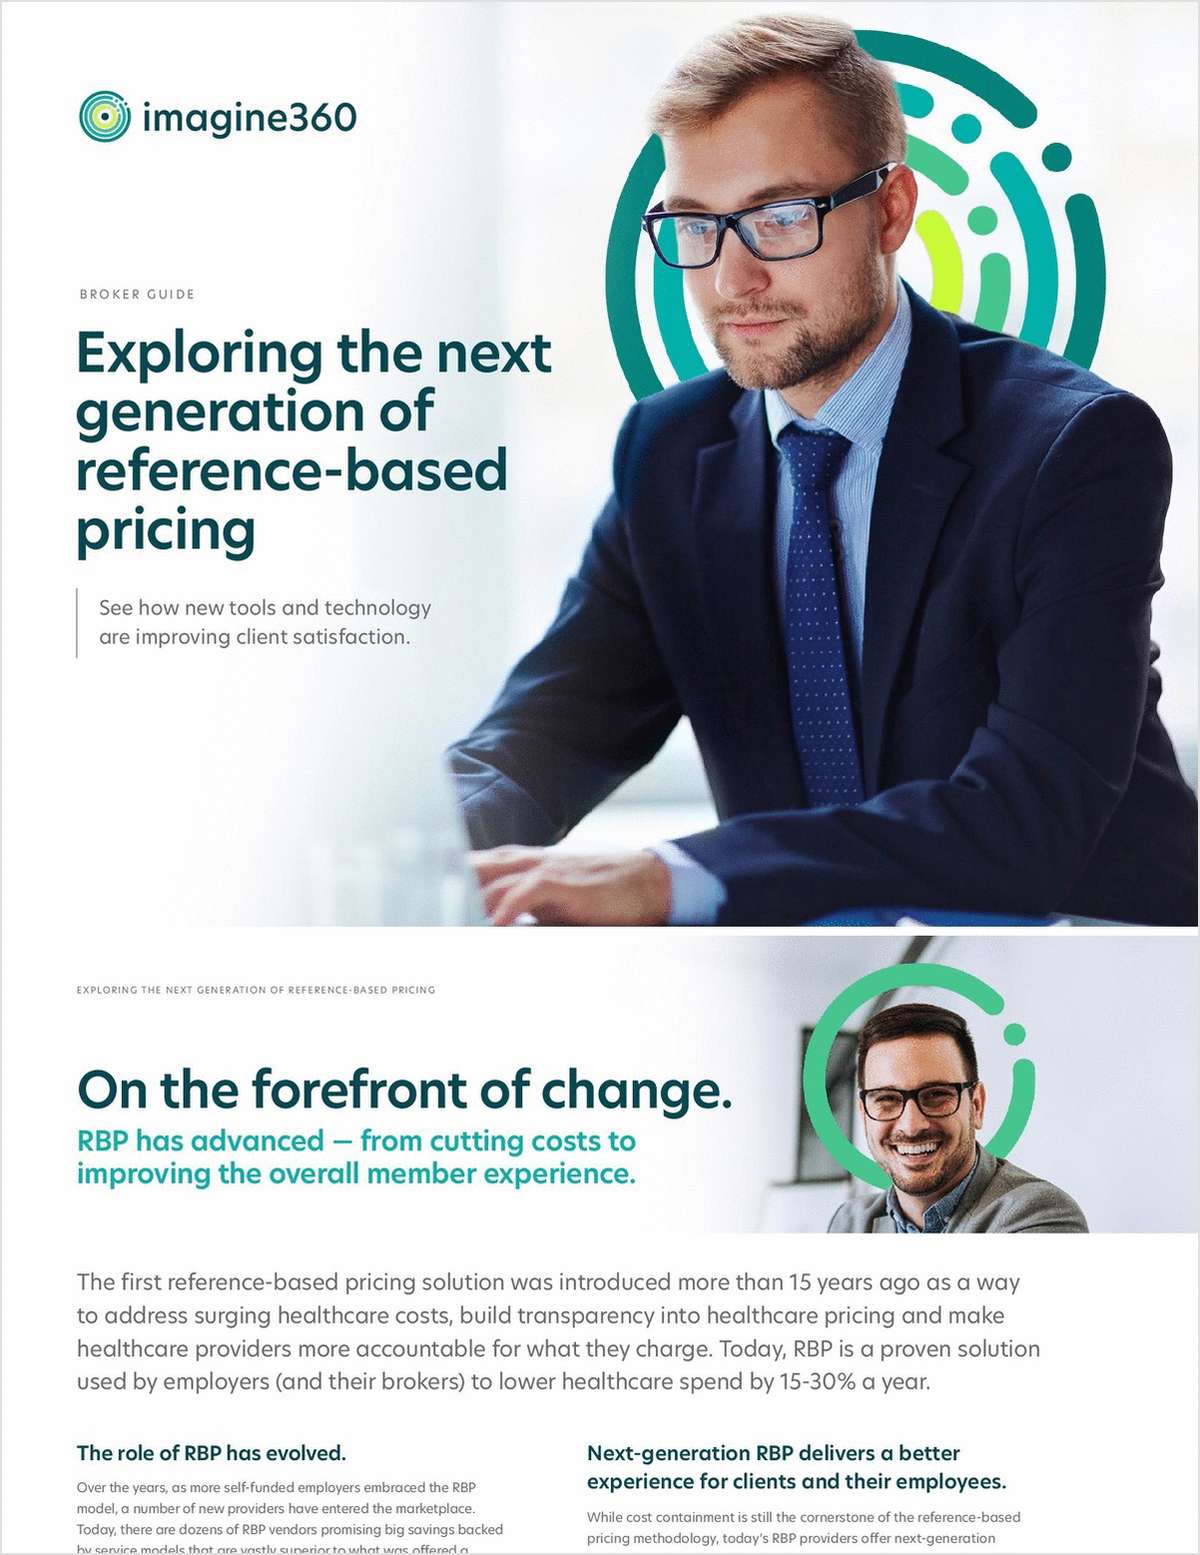 Broker Guide: Exploring the Next Generation of Reference-Based Pricing